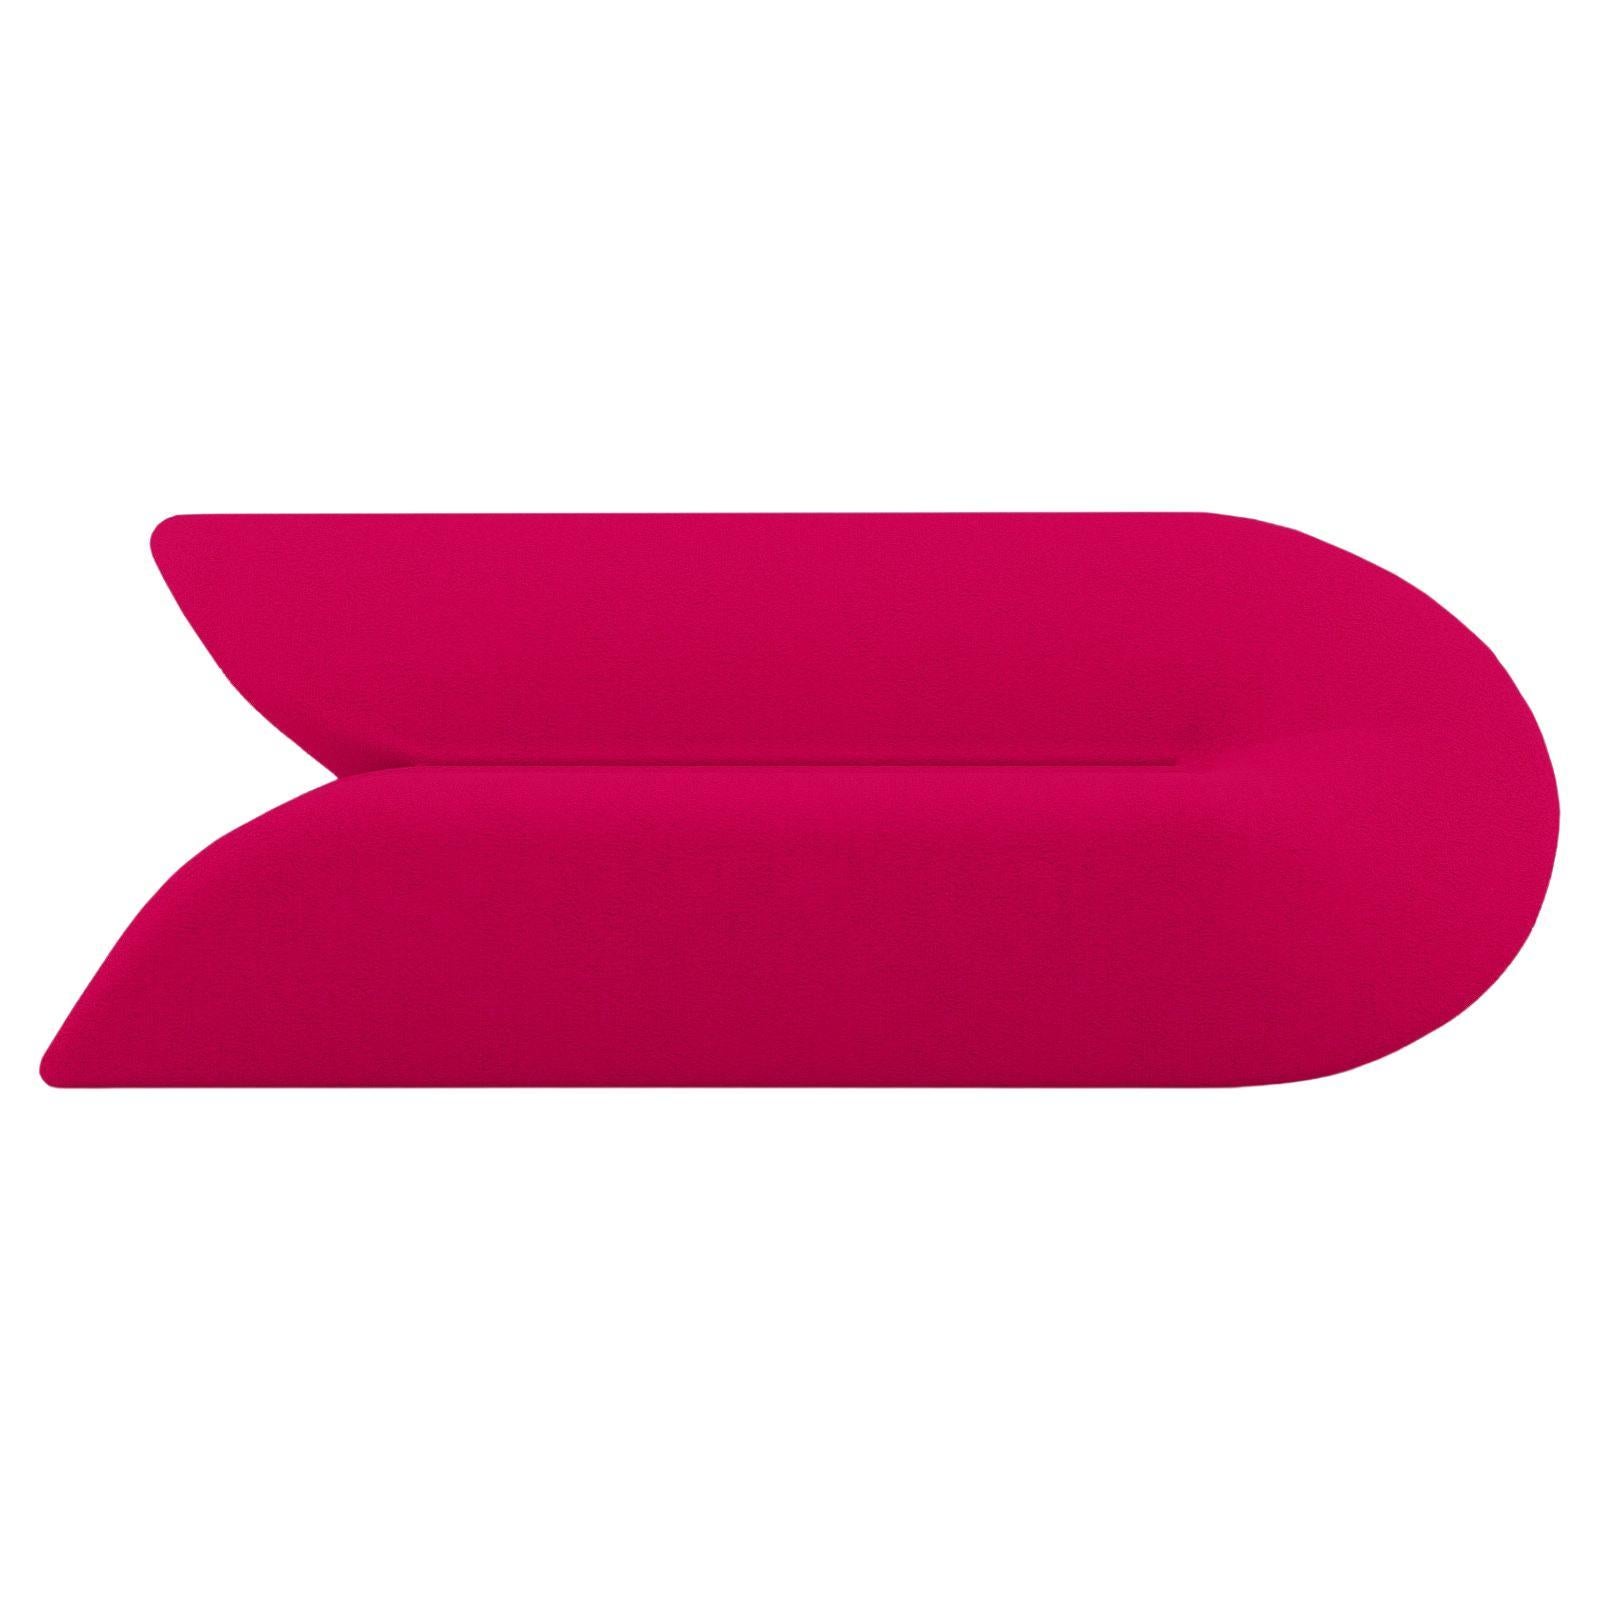 Delta Sofa - Modern Raspberry Red Upholstered Three Seat Sofa For Sale